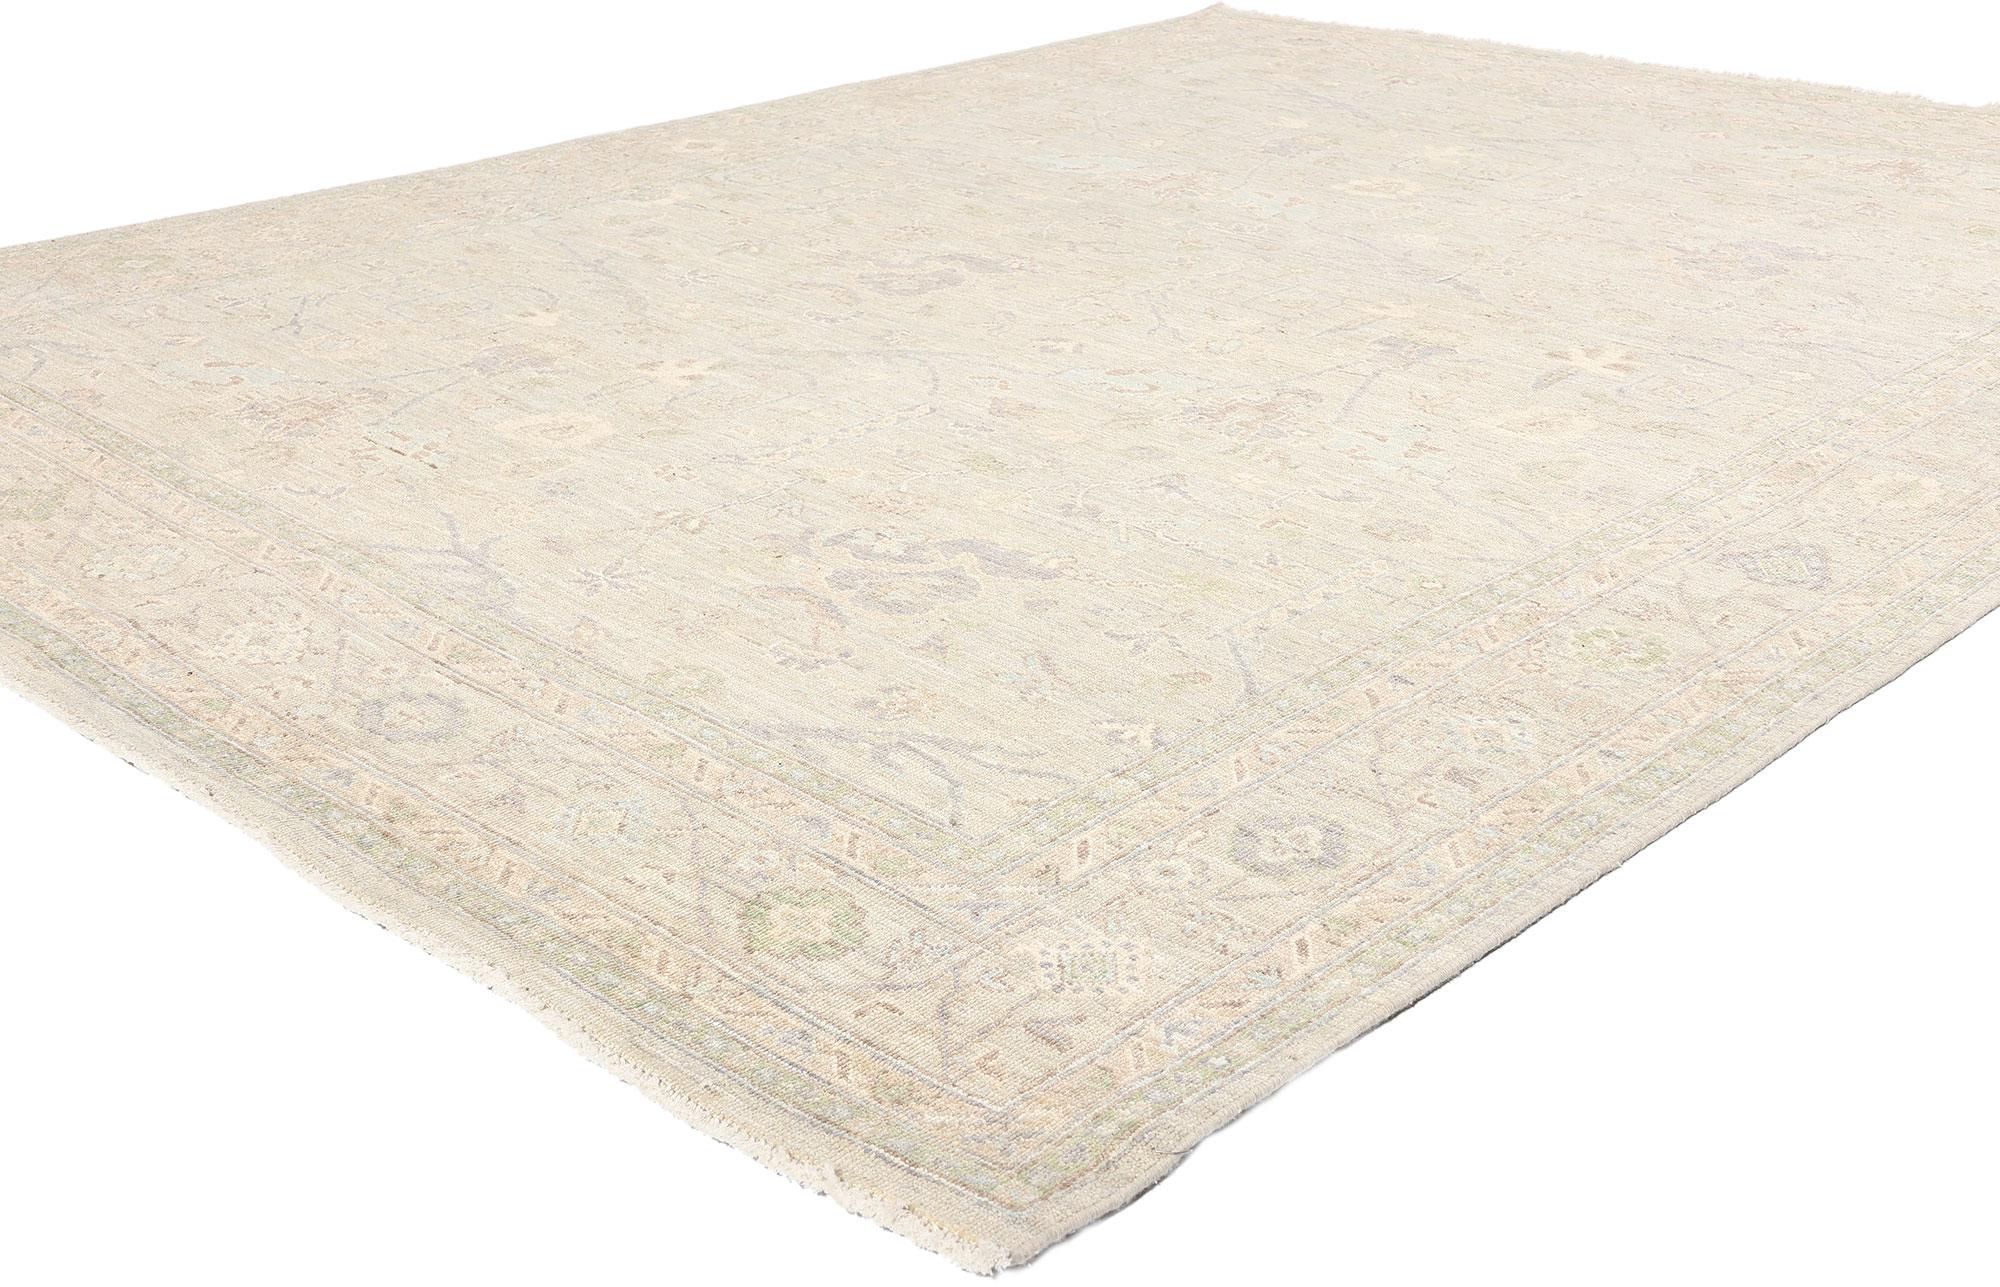 81113 Organic Modern Sultanabad Rug, 07'10 x 10'03. Pakistani Sultanabad rugs are stunning handcrafted pieces originating from Pakistan, drawing inspiration from the traditional designs of Sultanabad rugs from Persia. Celebrated for their